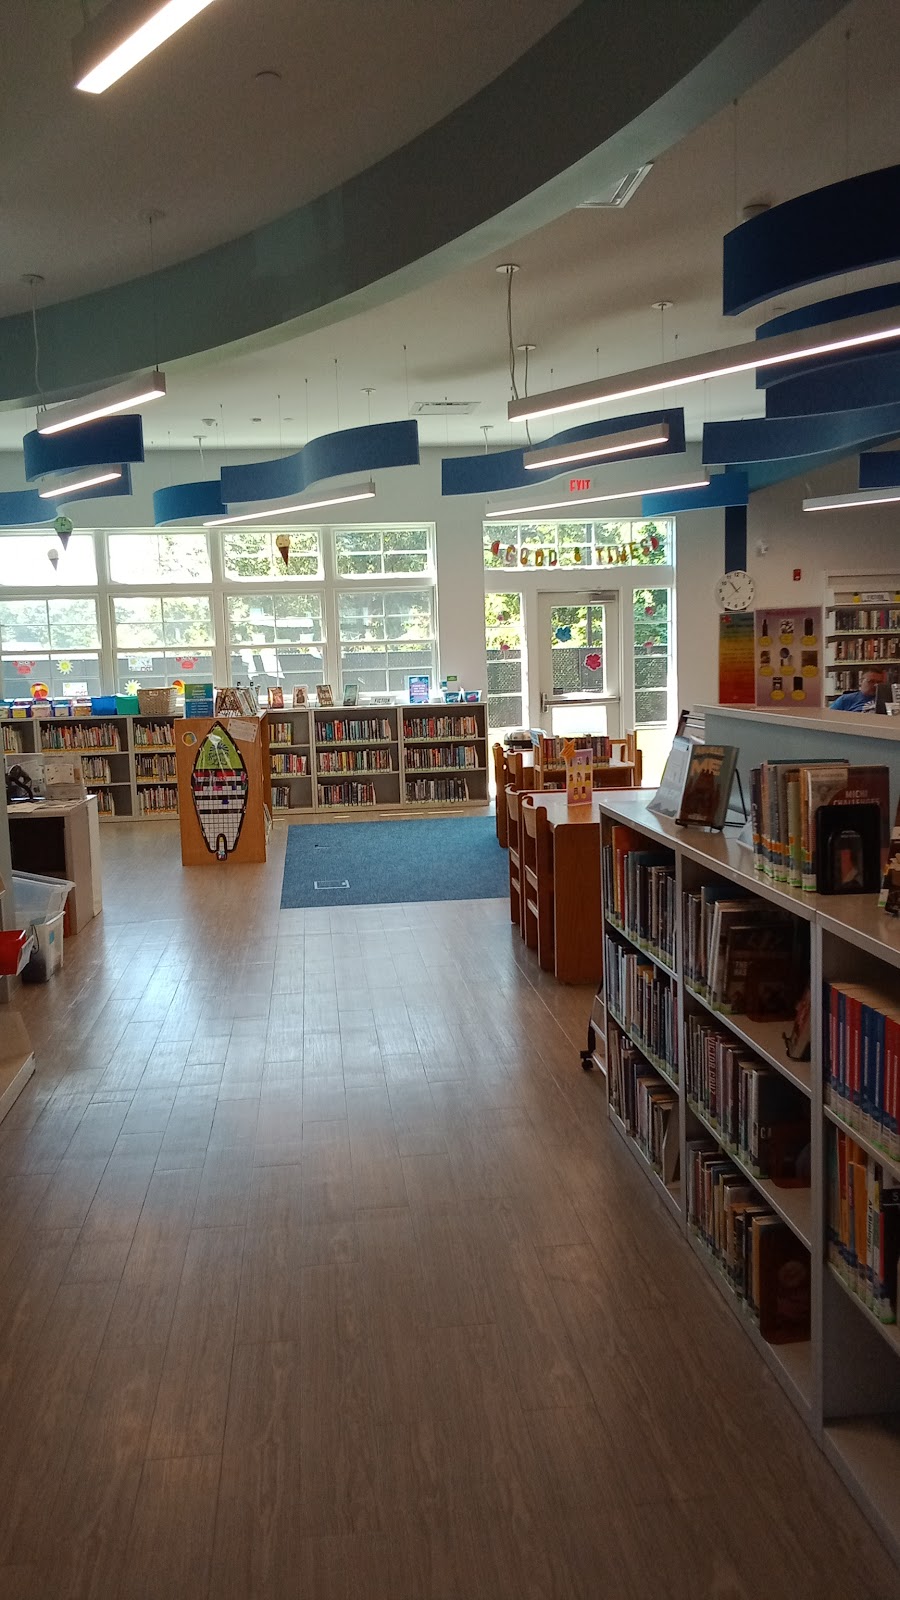 Moriches Branch- Mastics Moriches Shirley Community Library | 201 Montauk Hwy, Moriches, NY 11955 | Phone: (631) 399-1511